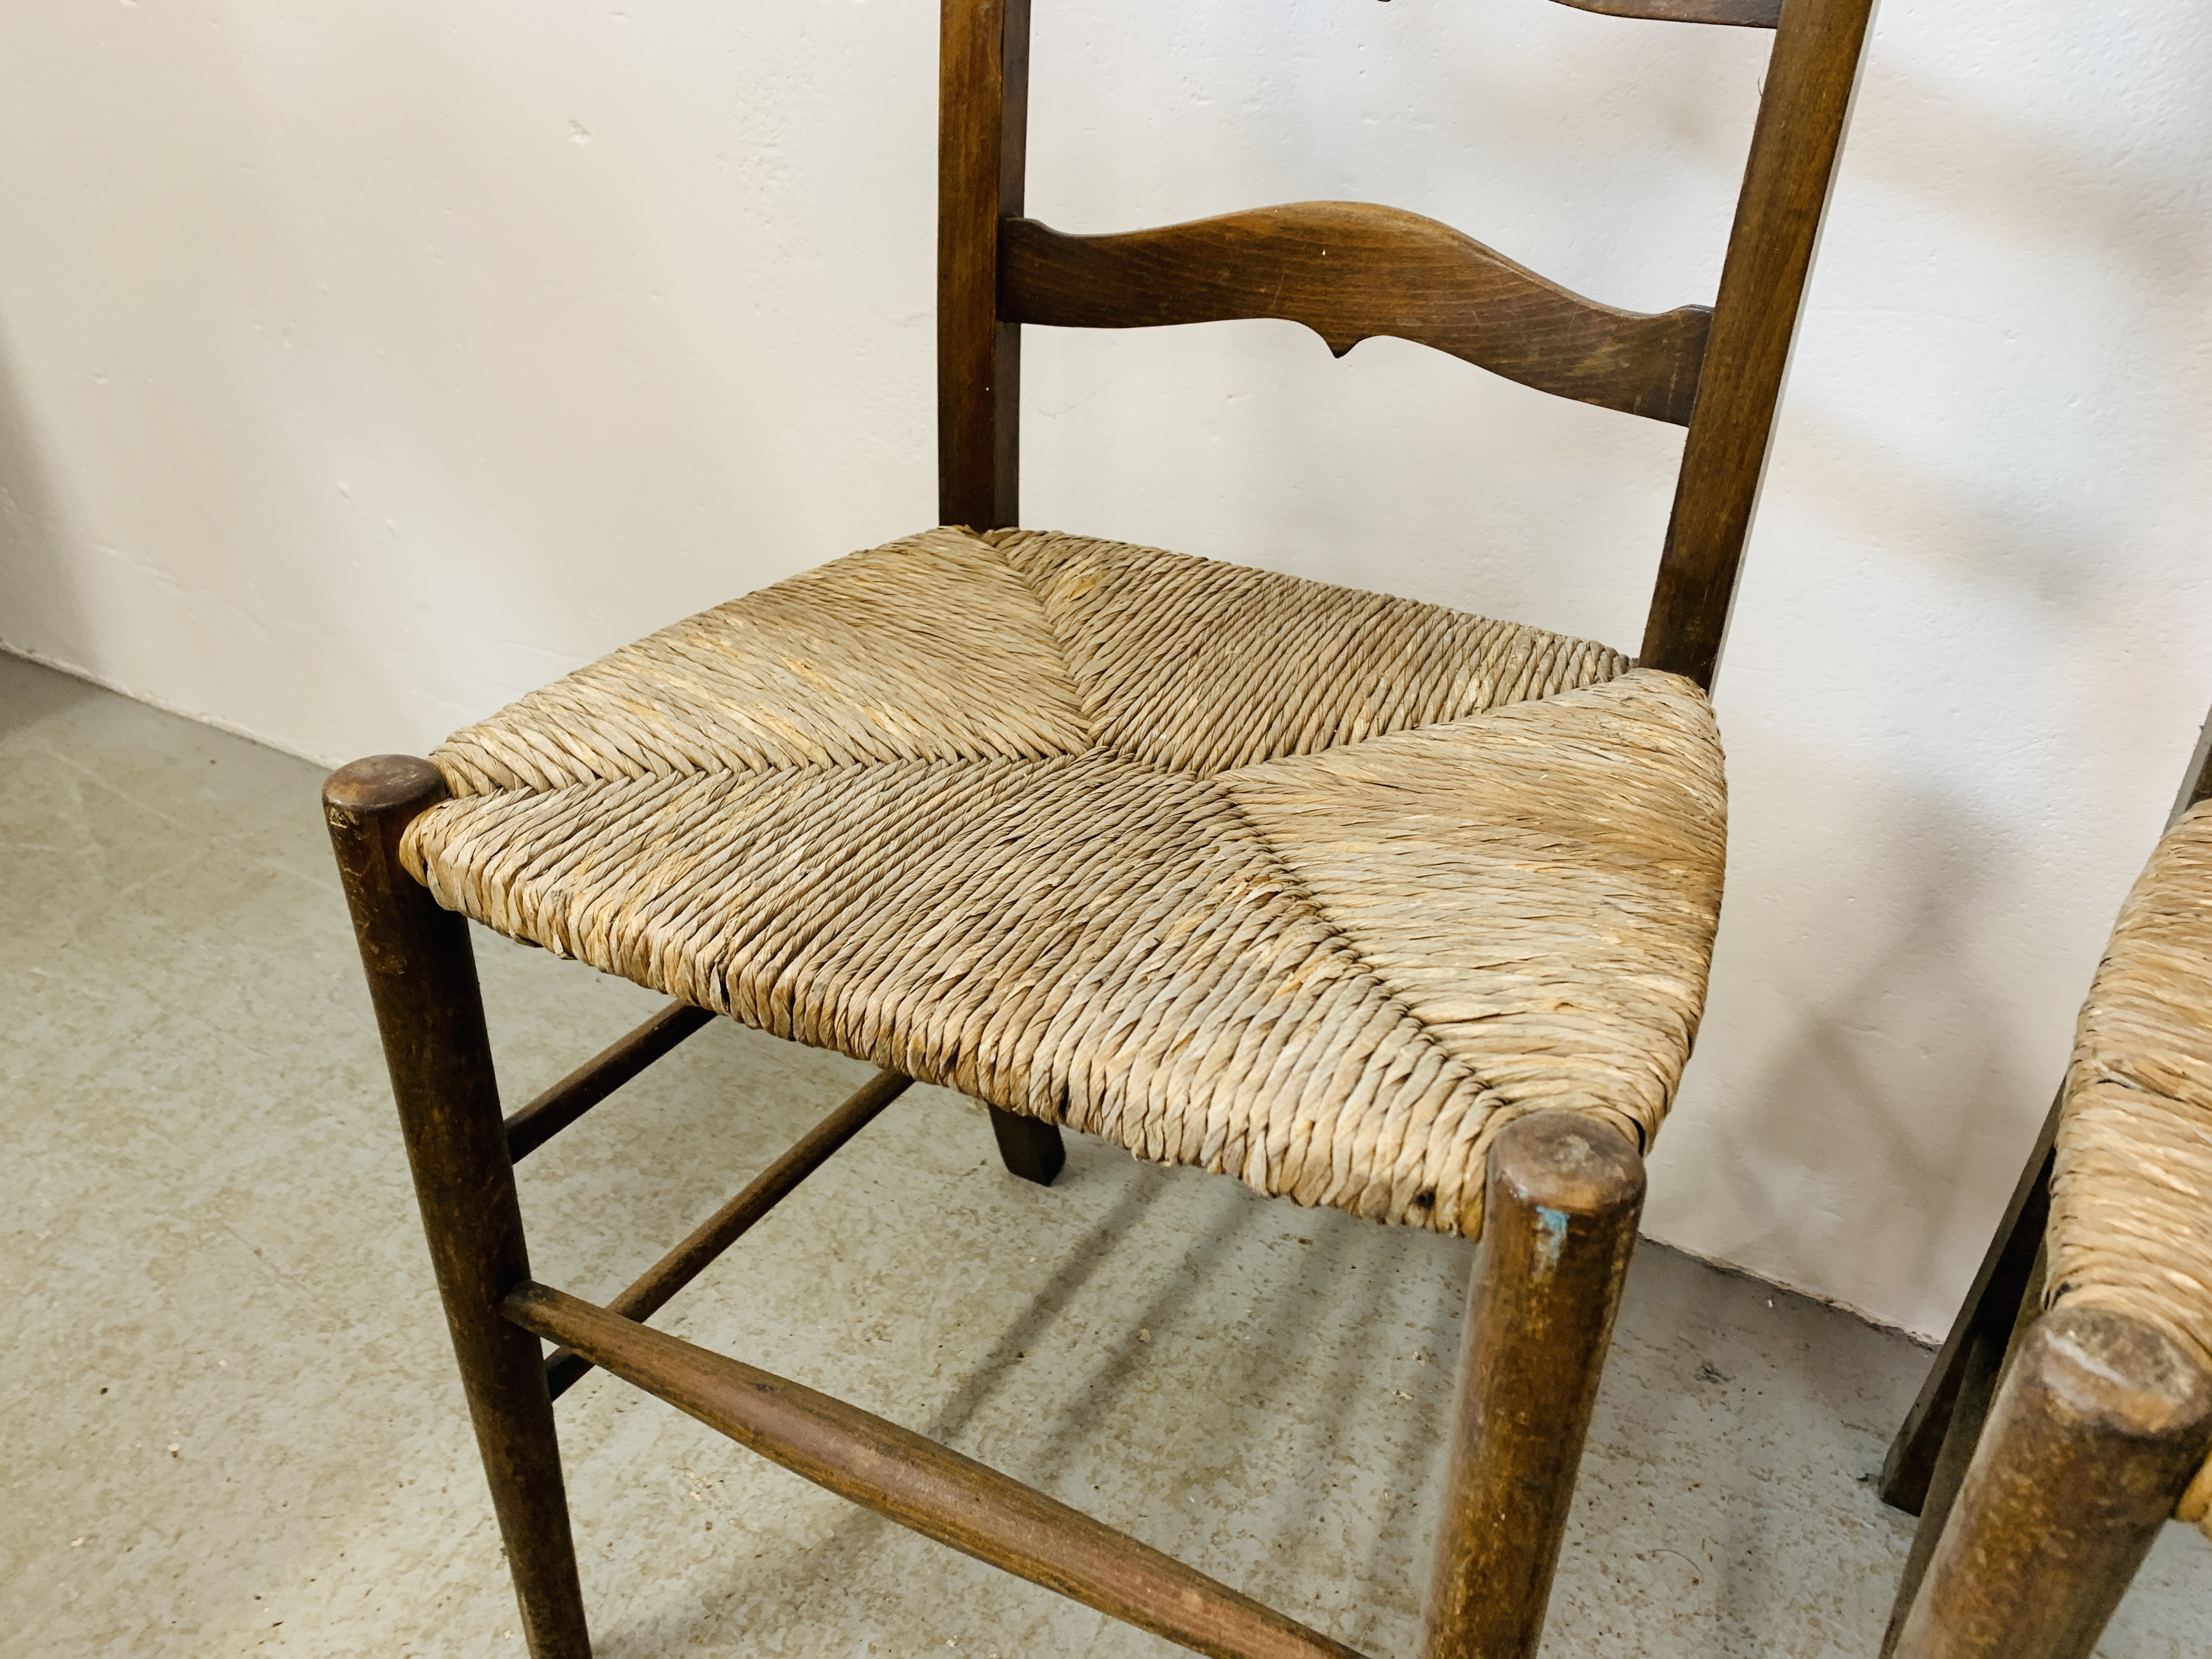 A PAIR OF ANTIQUE OAK LADDER BACK RUSH SEATED CHAIRS - Image 6 of 8